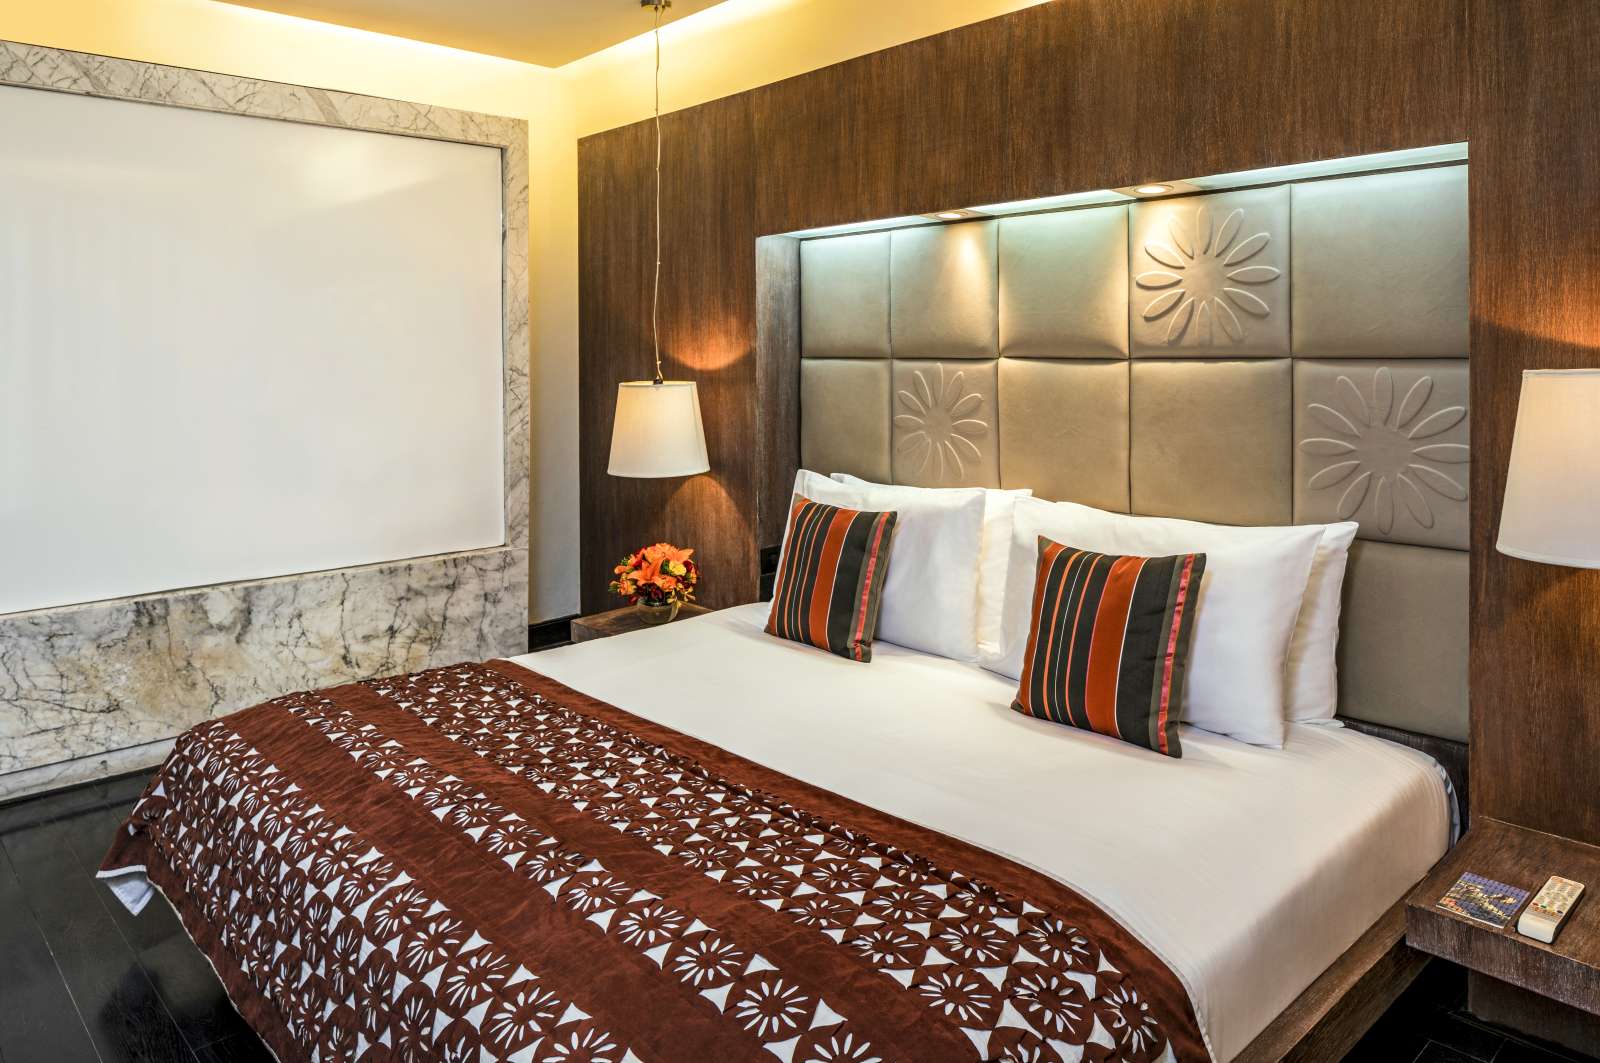 Deluxe Suites at The Park Hotels New Delhi